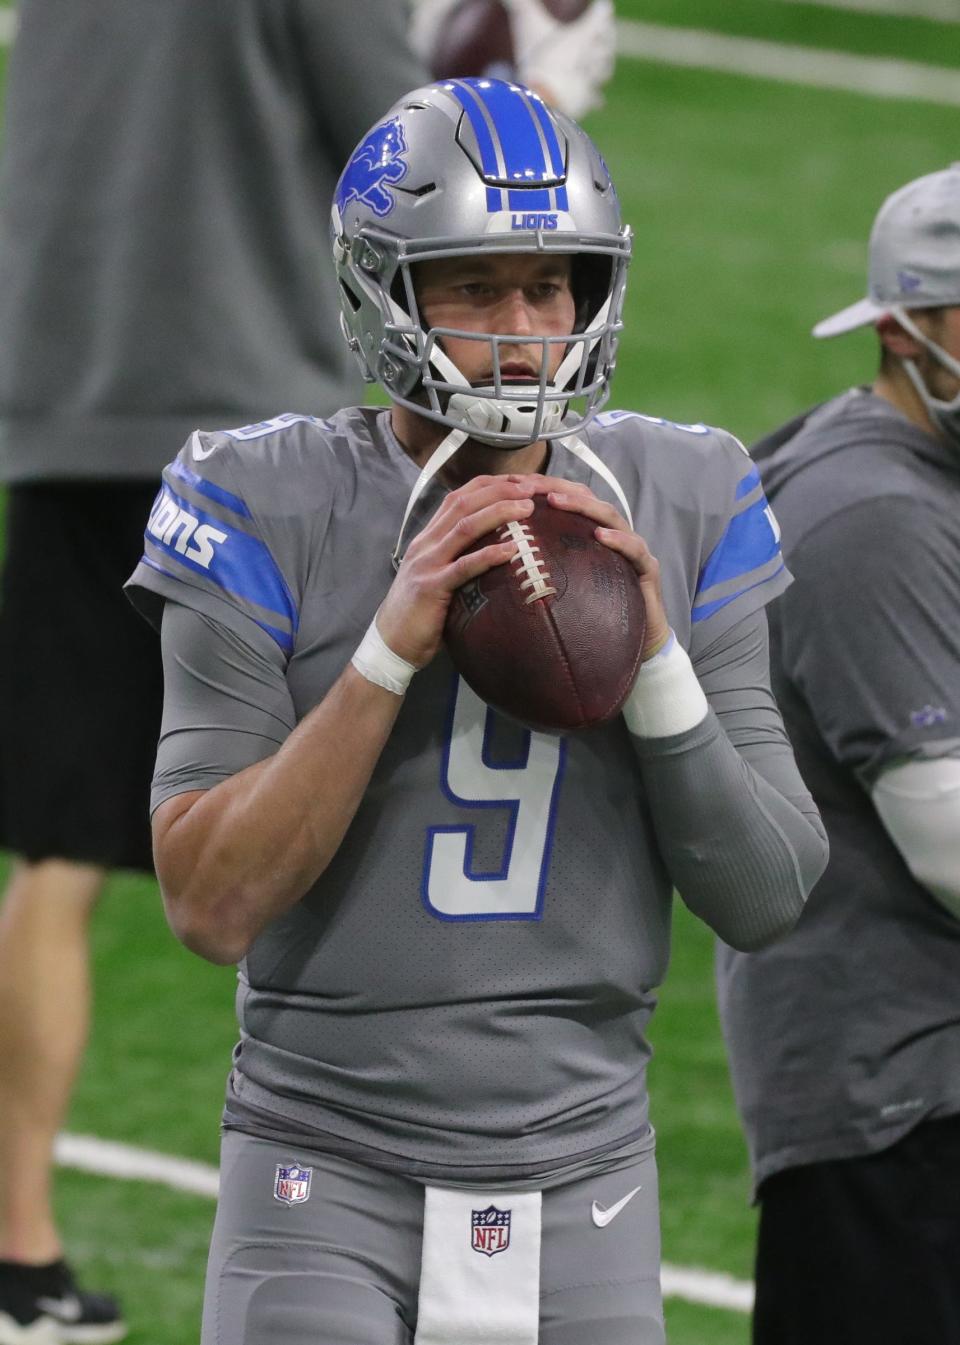 Detroit Lions quarterback Matthew Stafford warms up before action against the Tampa Bay Buccaneers, Saturday, Dec. 26, 2020 at Ford Field.